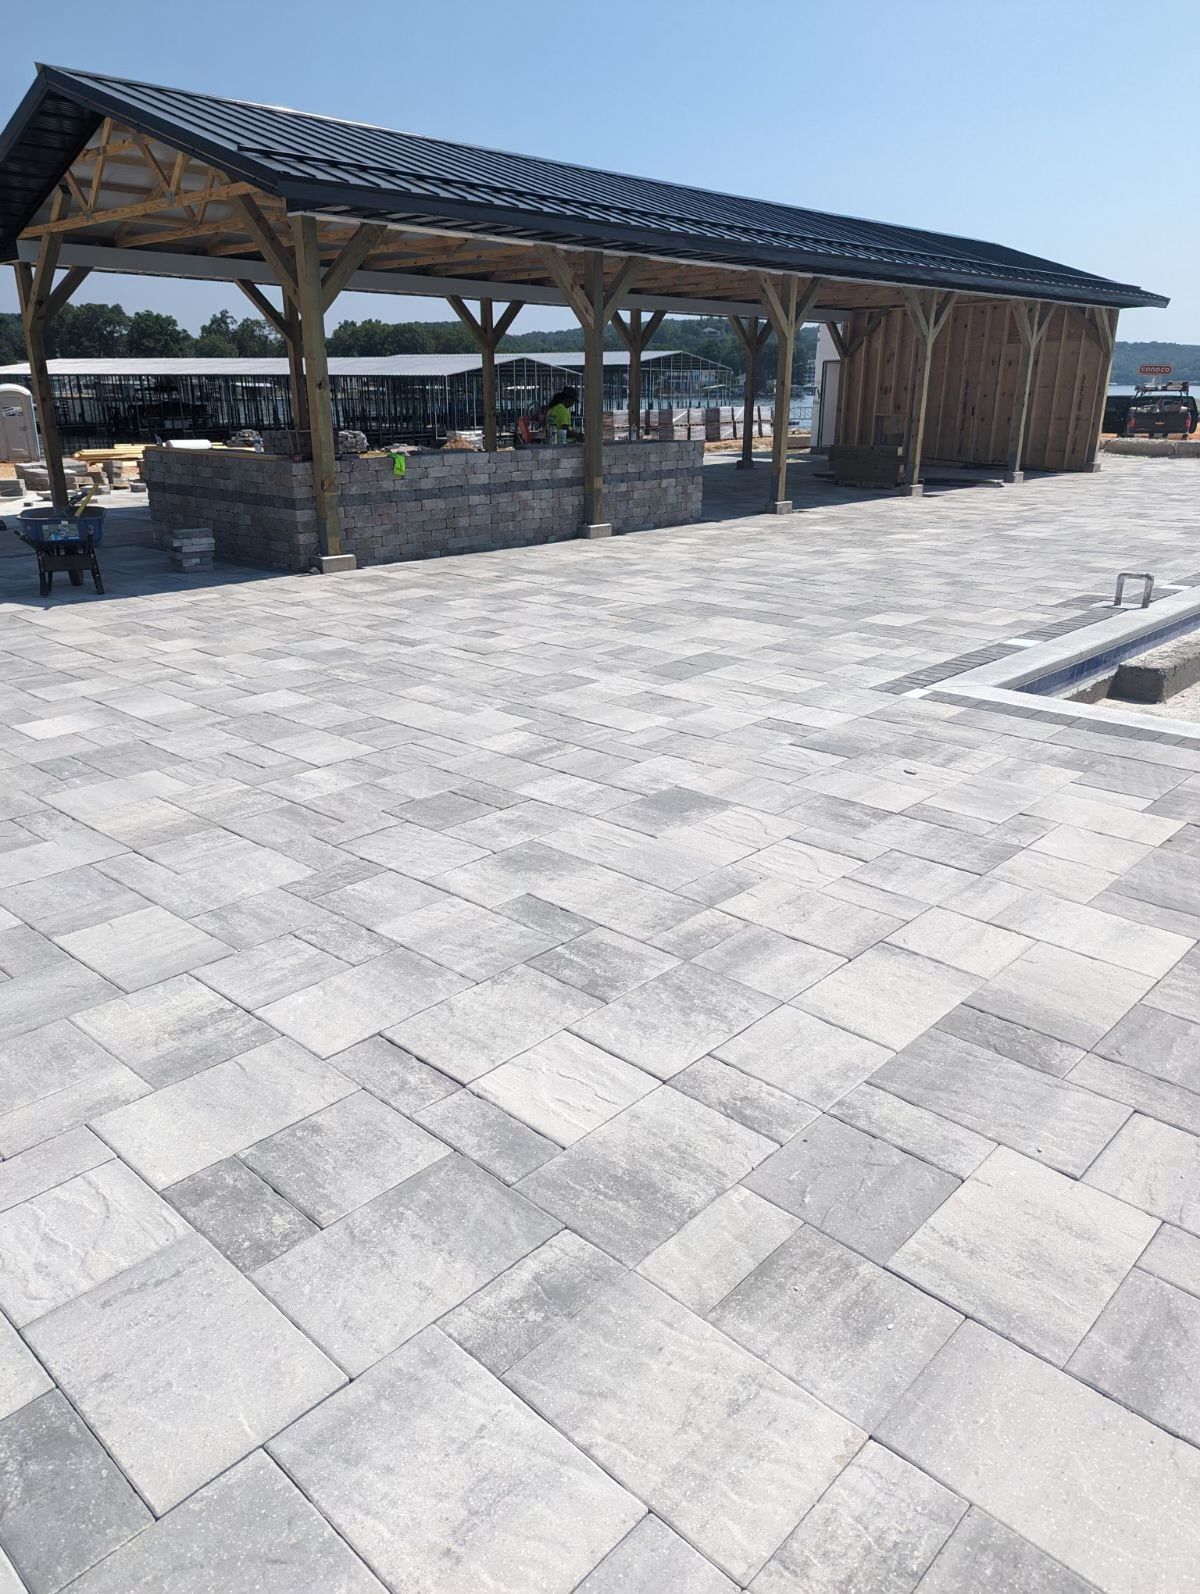 Choose the Best Pavers for Your Patio or Walkway Build With Stockman Stoneworks Valencia Valley.